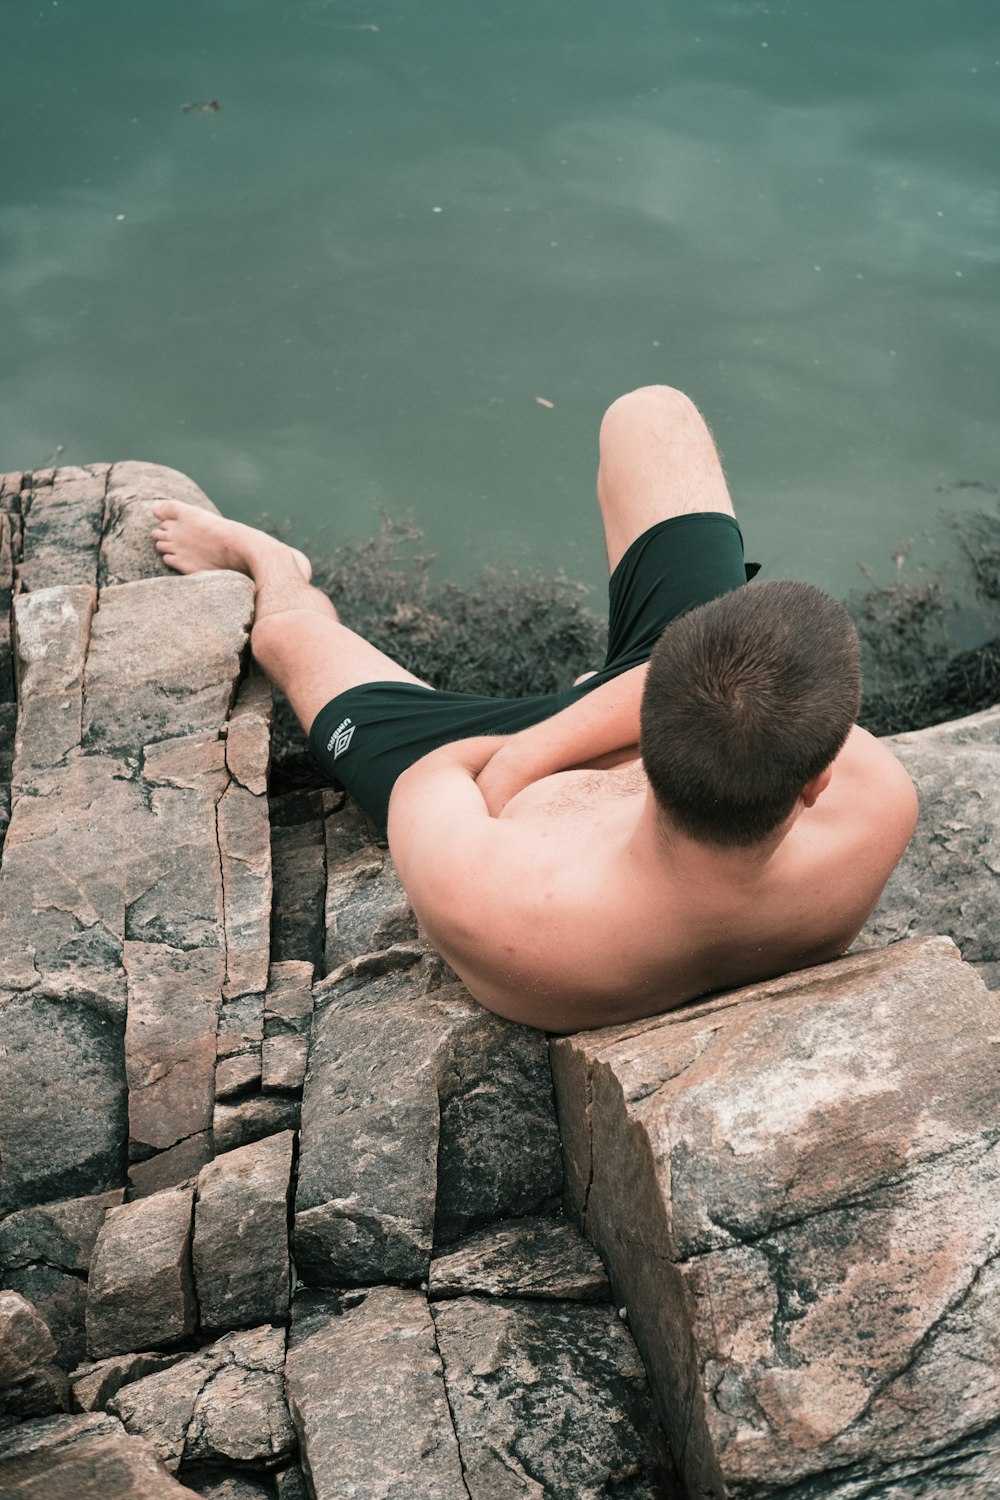 man in black shorts sitting on gray concrete rock near body of water during daytime